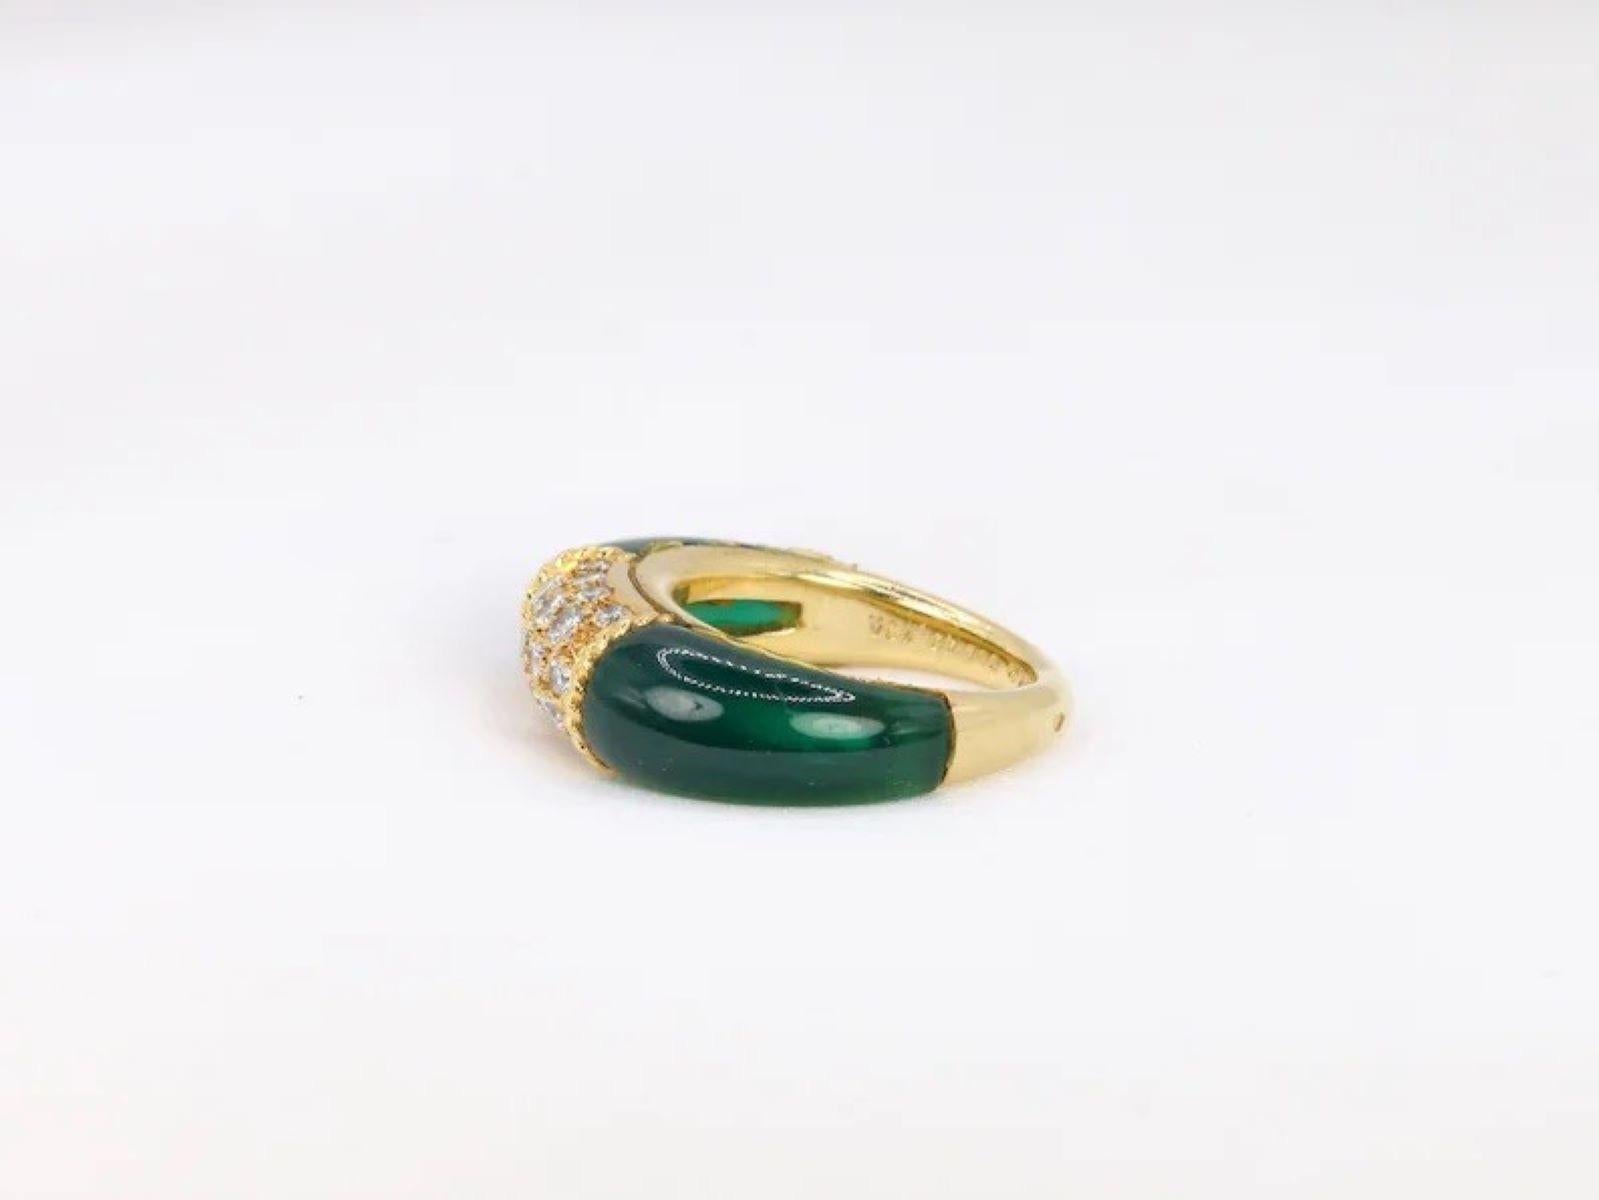  Rare Van Cleef & Arpels Chrysoprase and Diamond Ring Set in 18ct Yellow Gold In Good Condition For Sale In Addlestone, GB